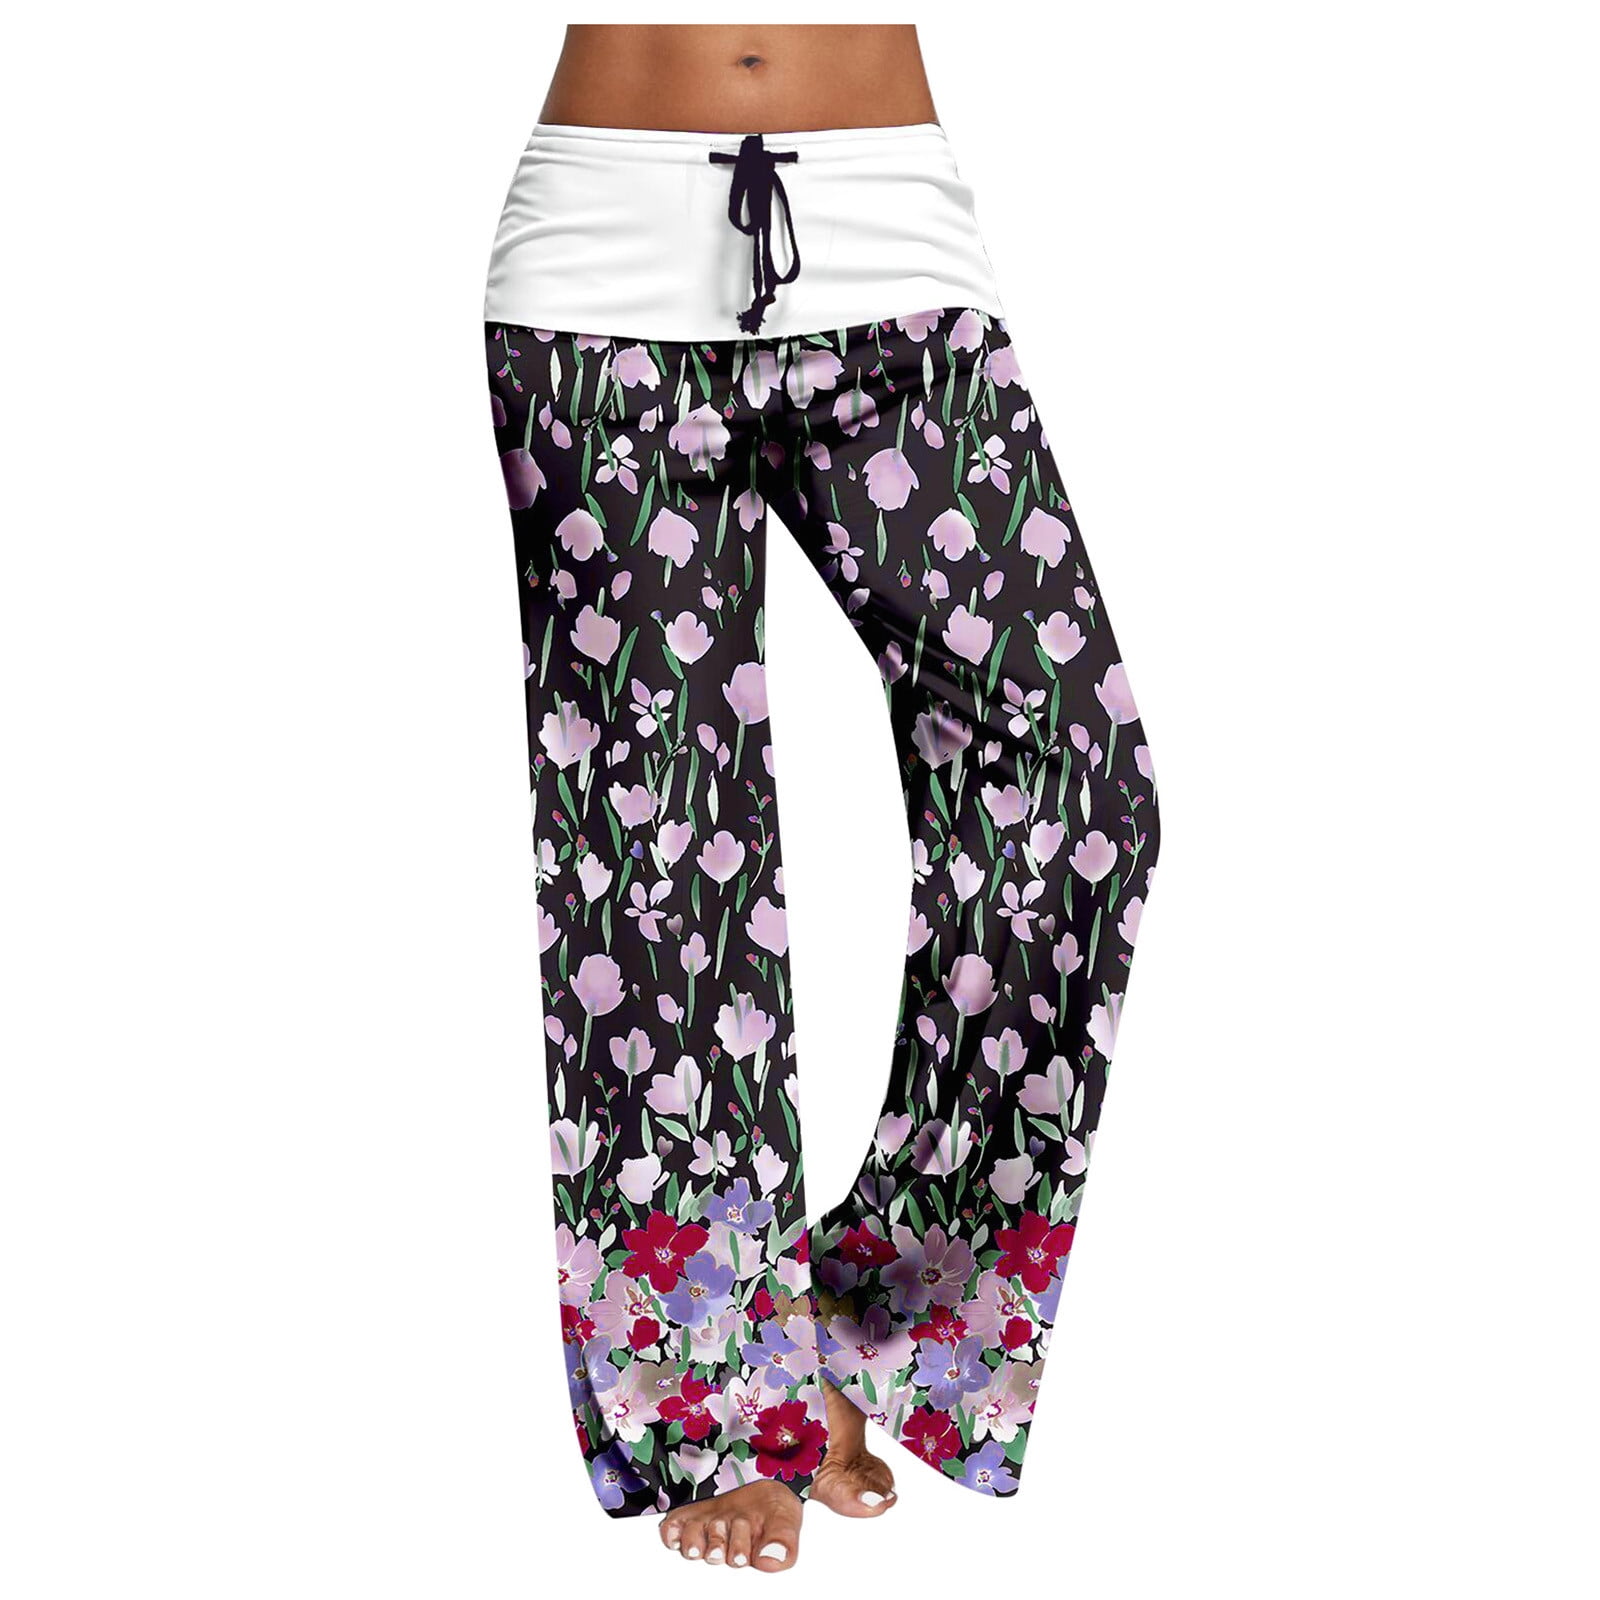 Women High Waist Lace Up Loose Printed Yoga Pants Casual Pants For ...